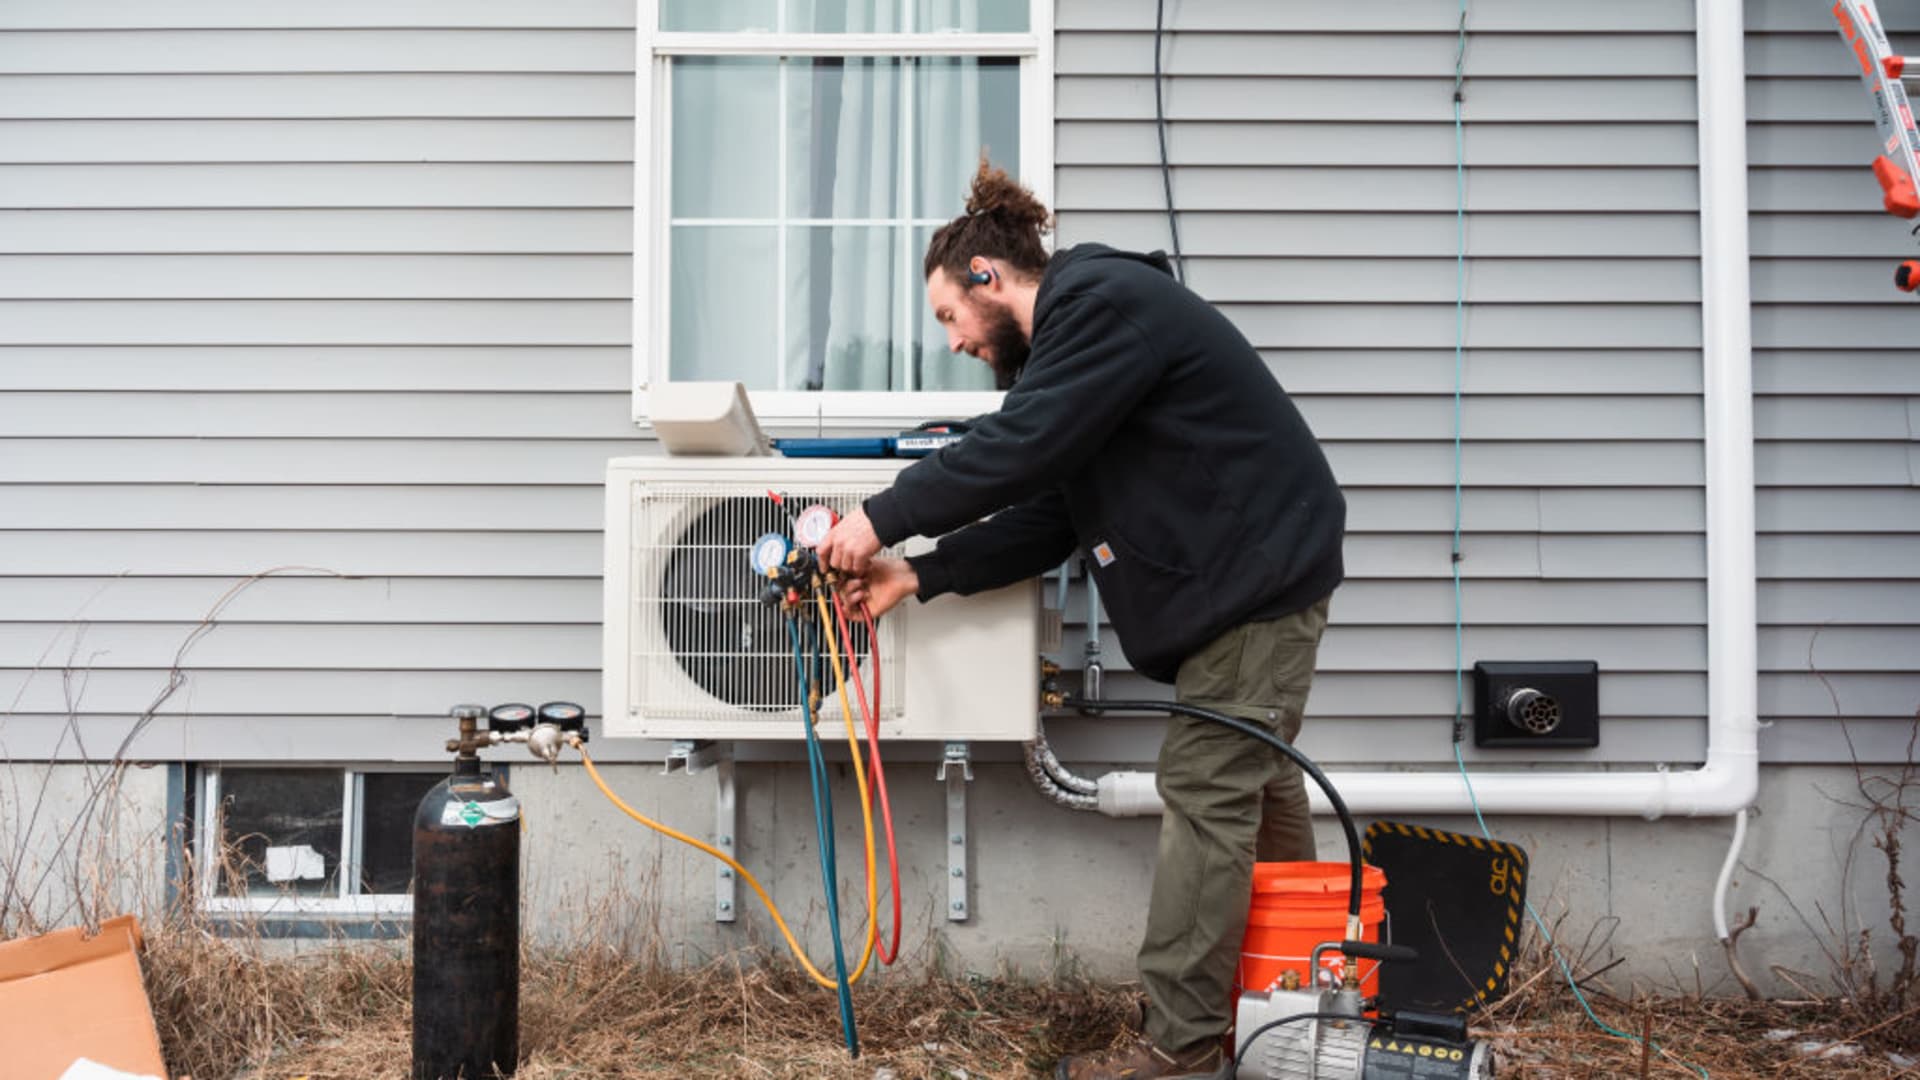 States announce major push to get to 20 million installed heat pumps, a cleaner alternative to gas furnaces that also provide AC